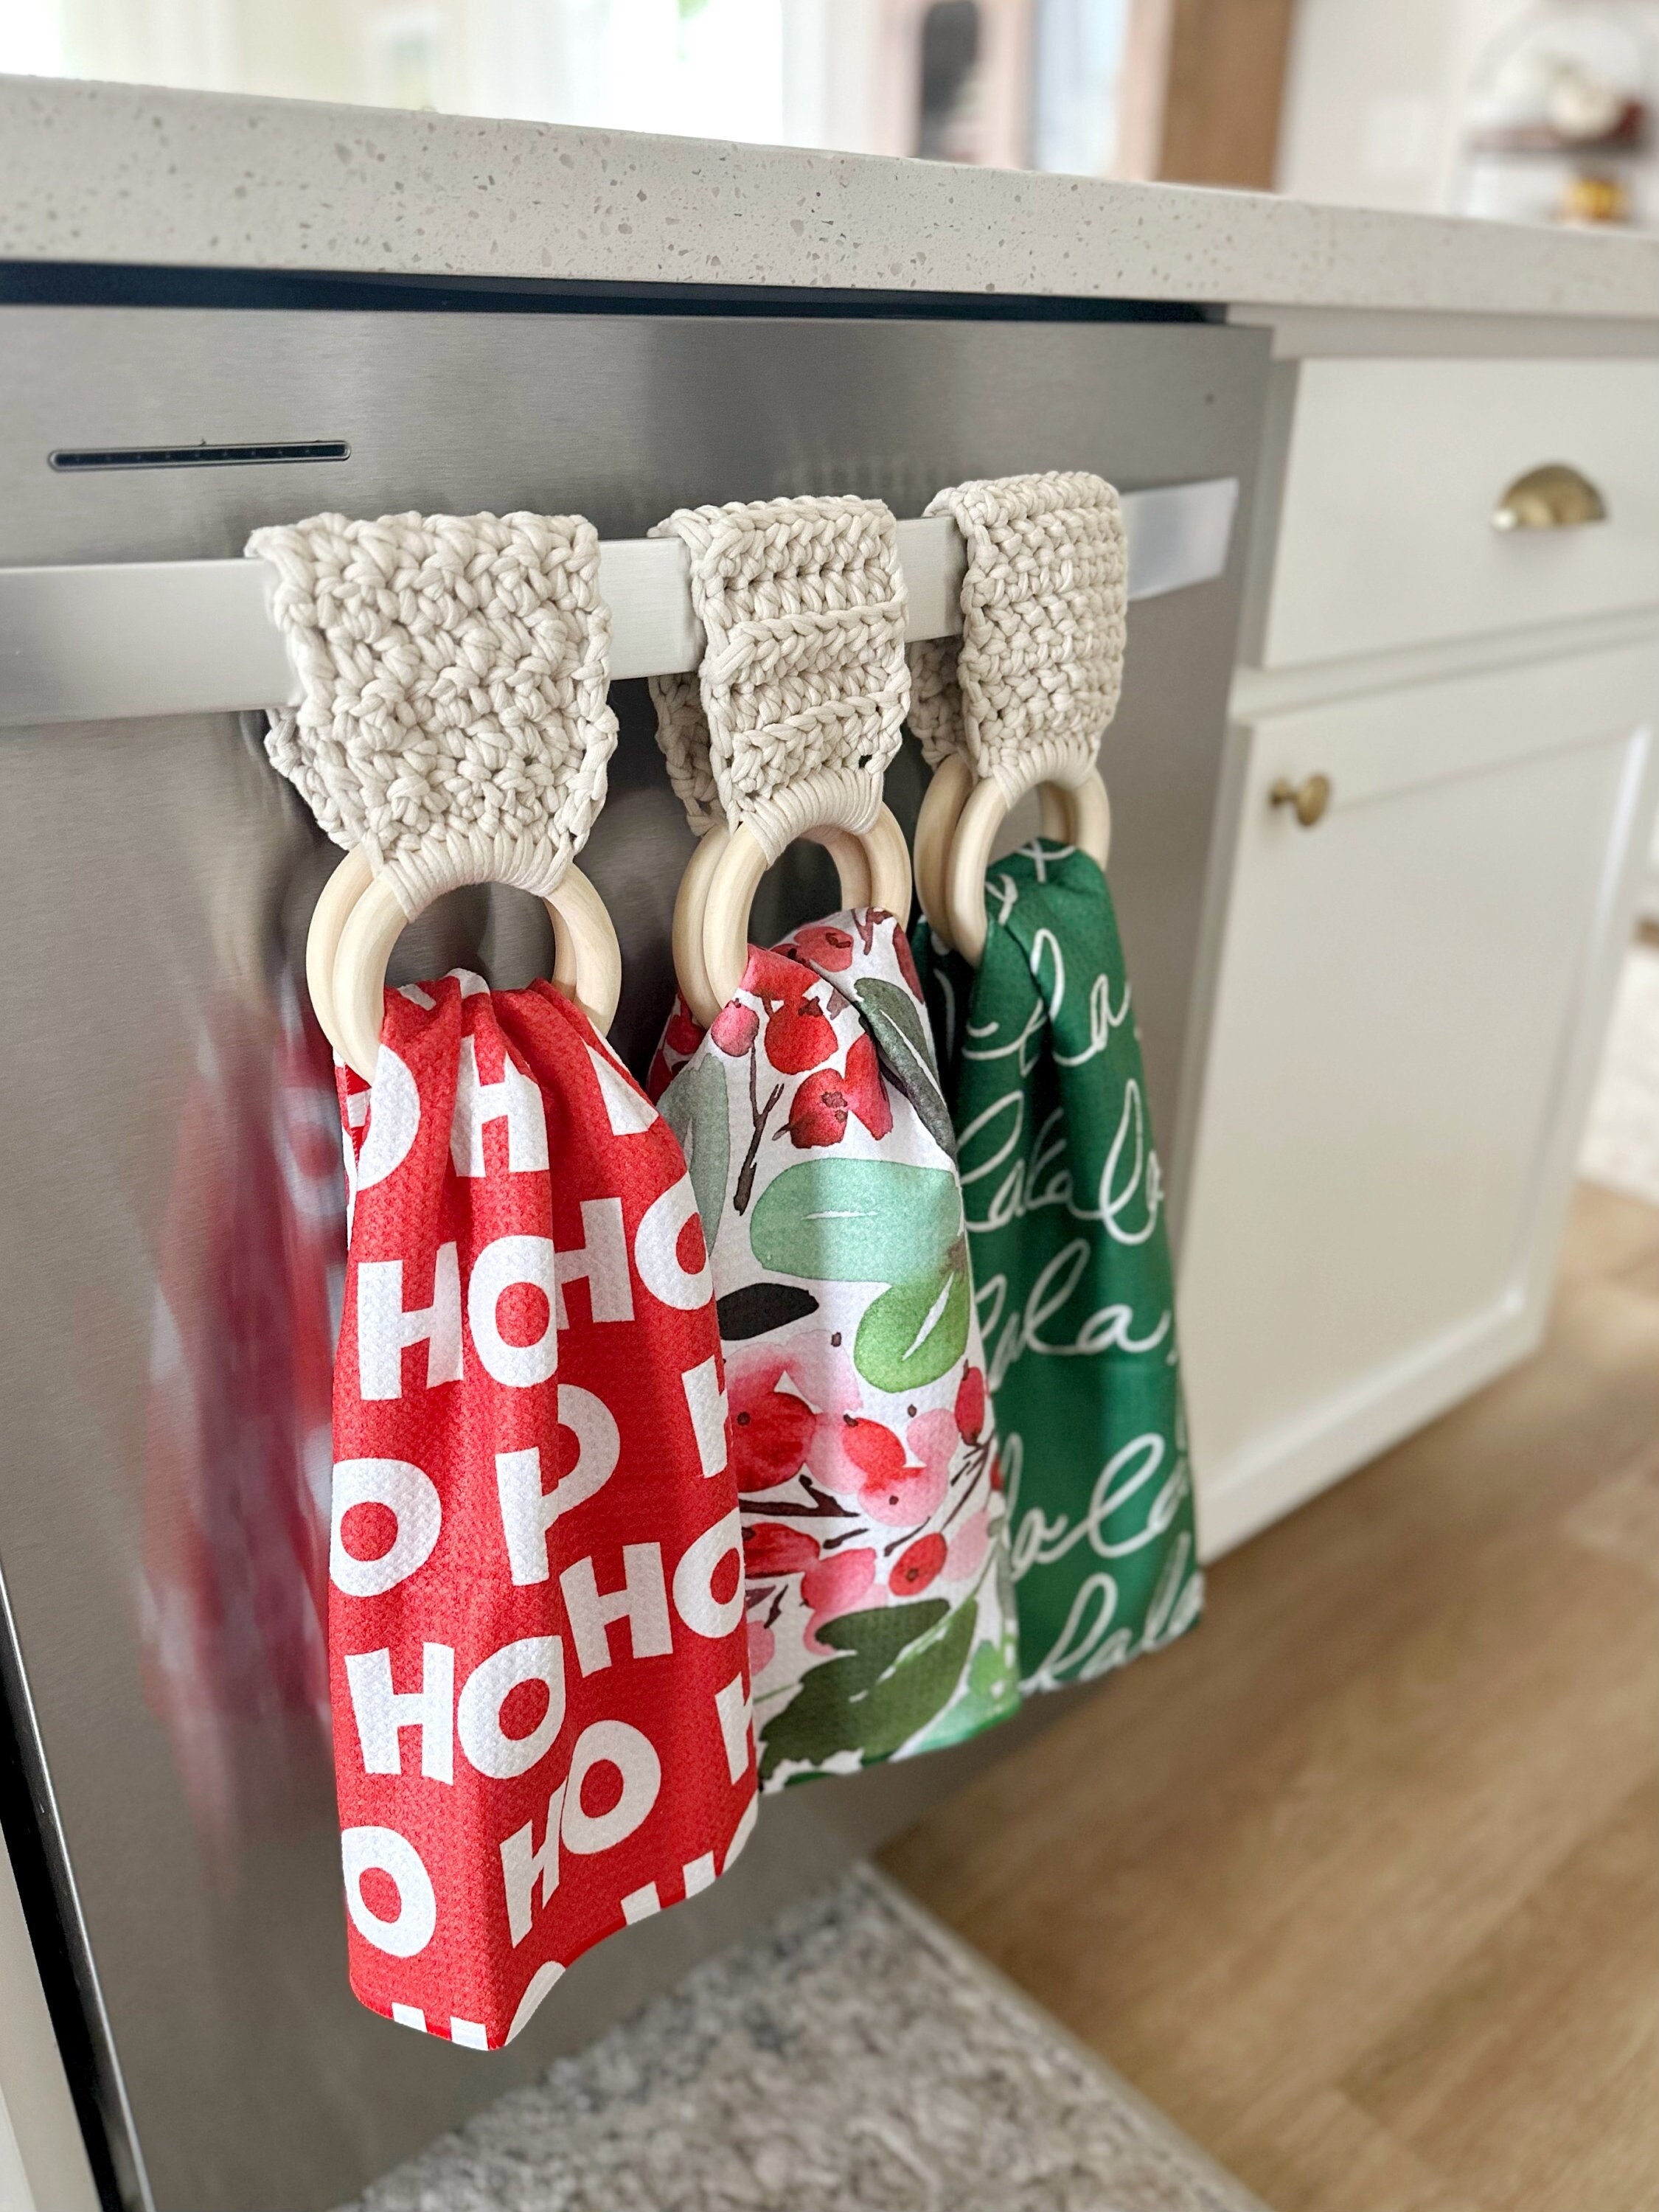 21 Kitchen Towels and Towel Holder ideas